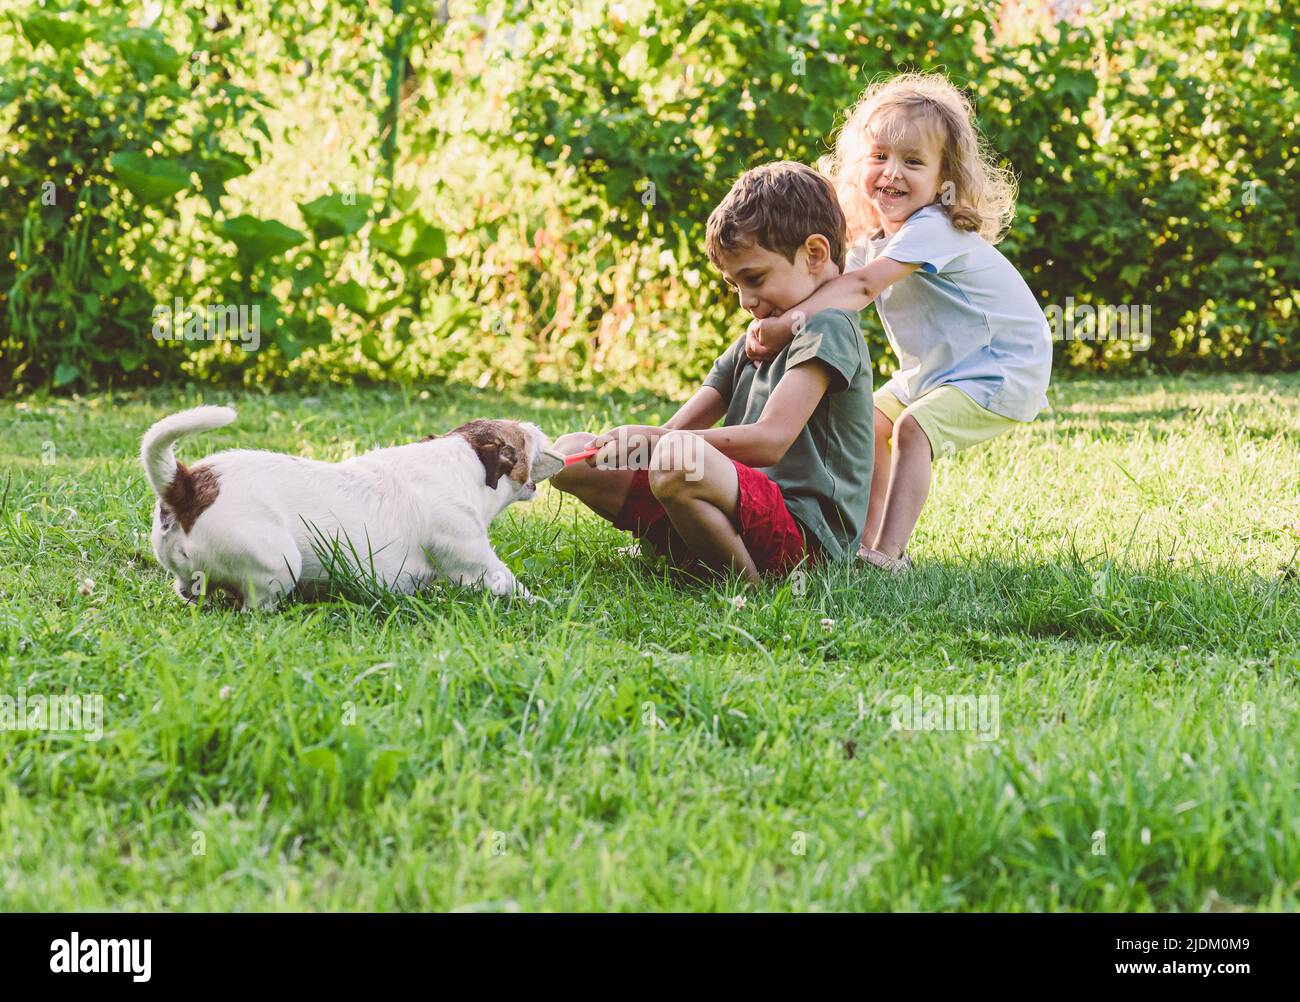 Happy smiling children playing tug-of-war game with their stubborn pet dog Stock Photo